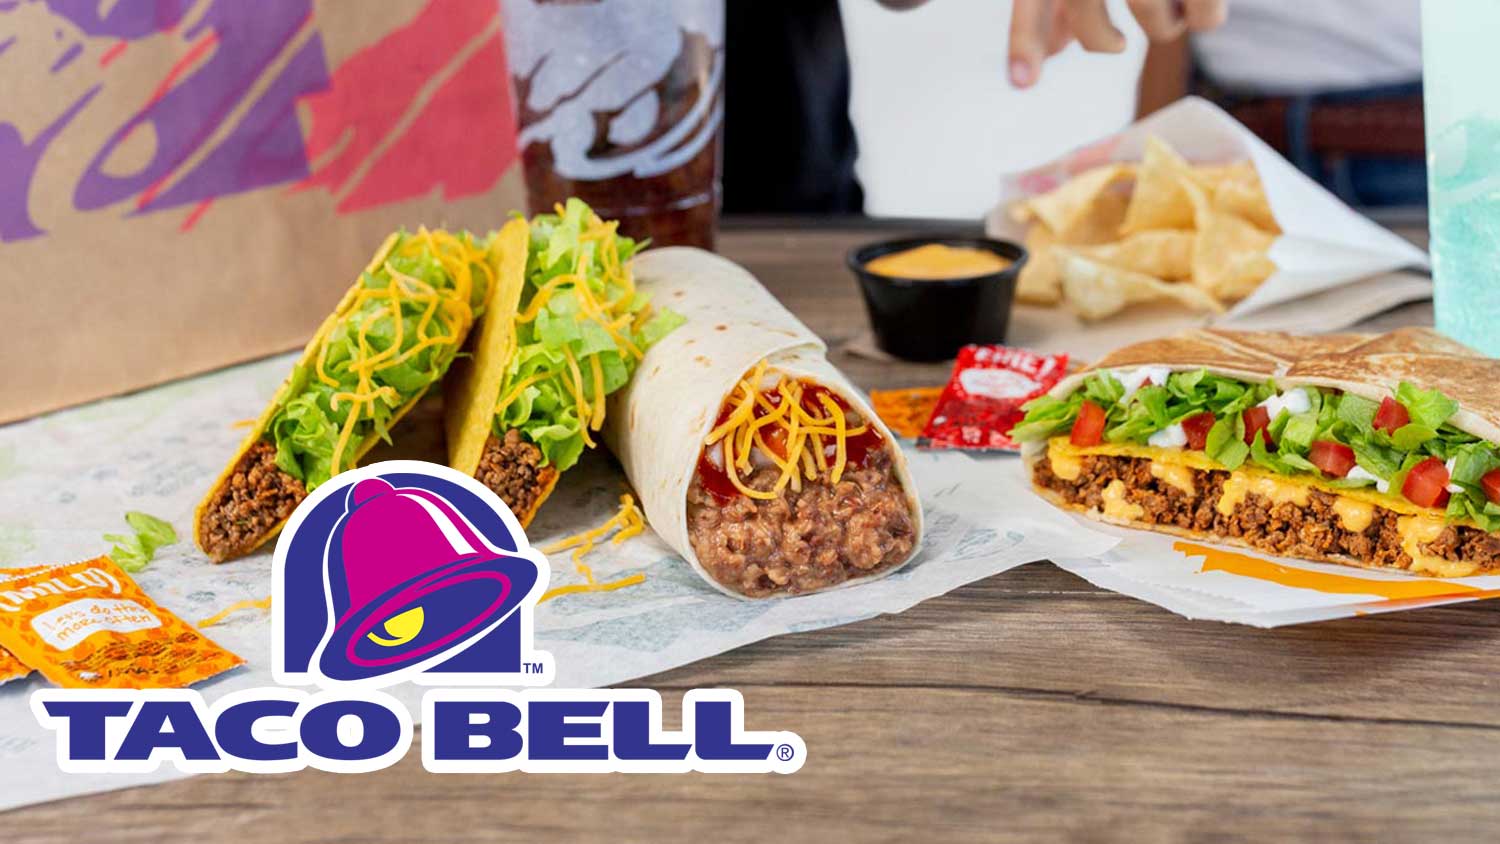 Taco Bell Kiosks Can Now Make Food Vegetarian Automatically